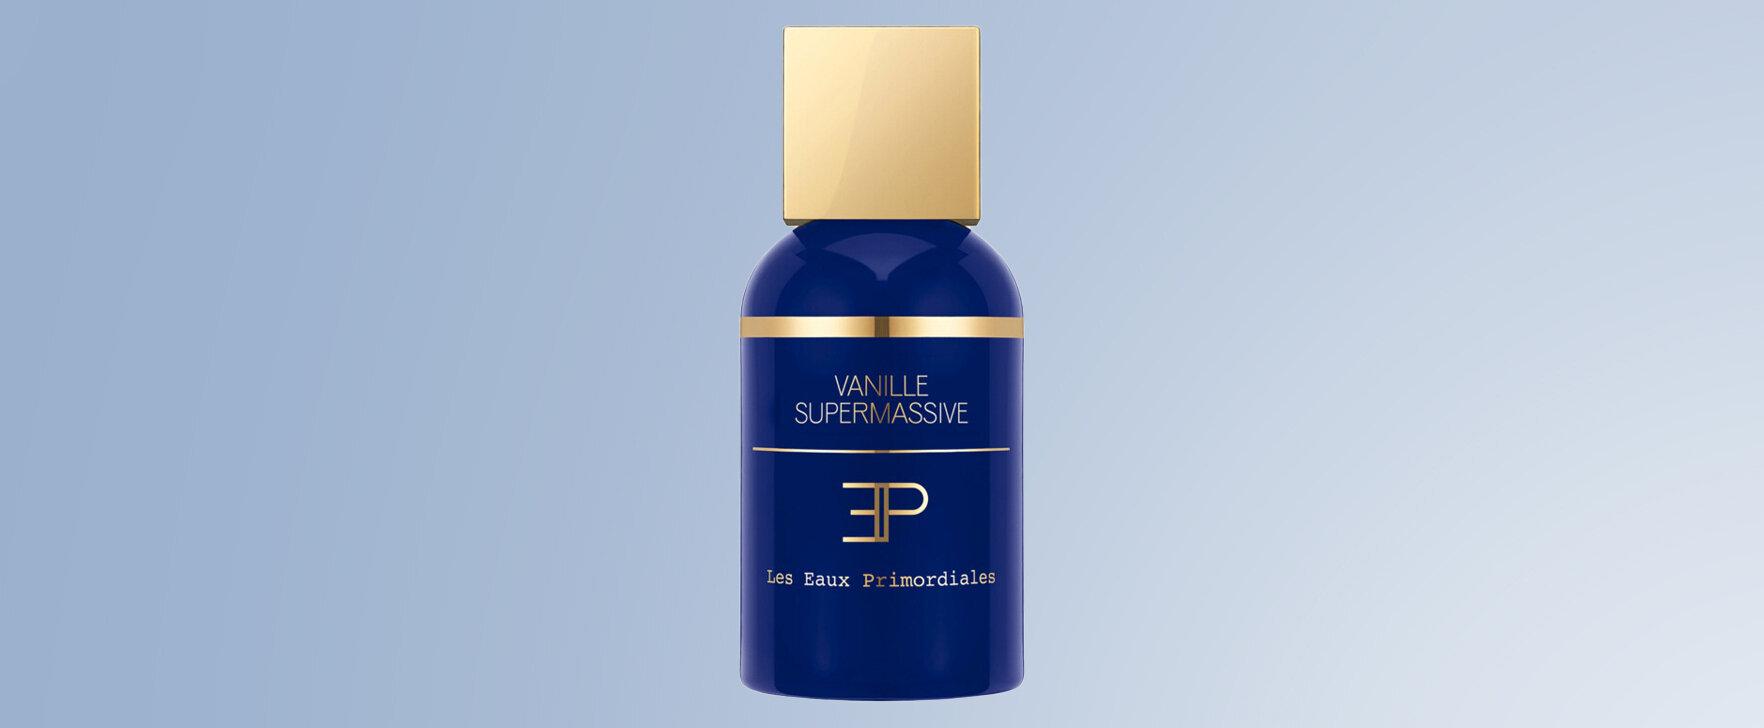 An Ode To Mystical Ocean Depths: The Unisex Fragrance Vanille Supermassive by Les Eaux Primordiales